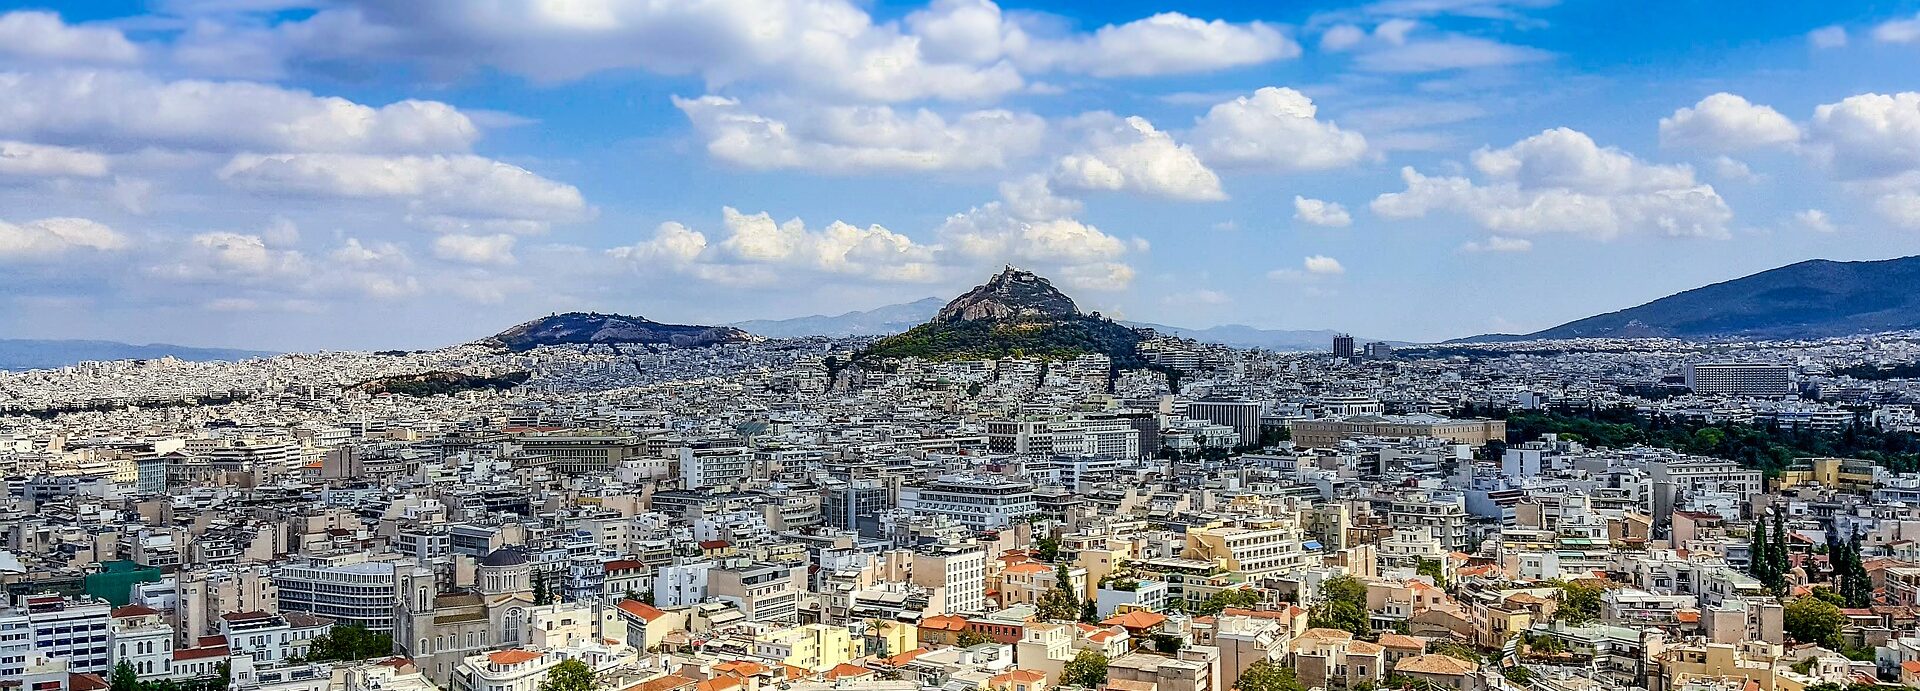 What was the “little Lycabettus” of Athens, and what happened to it?